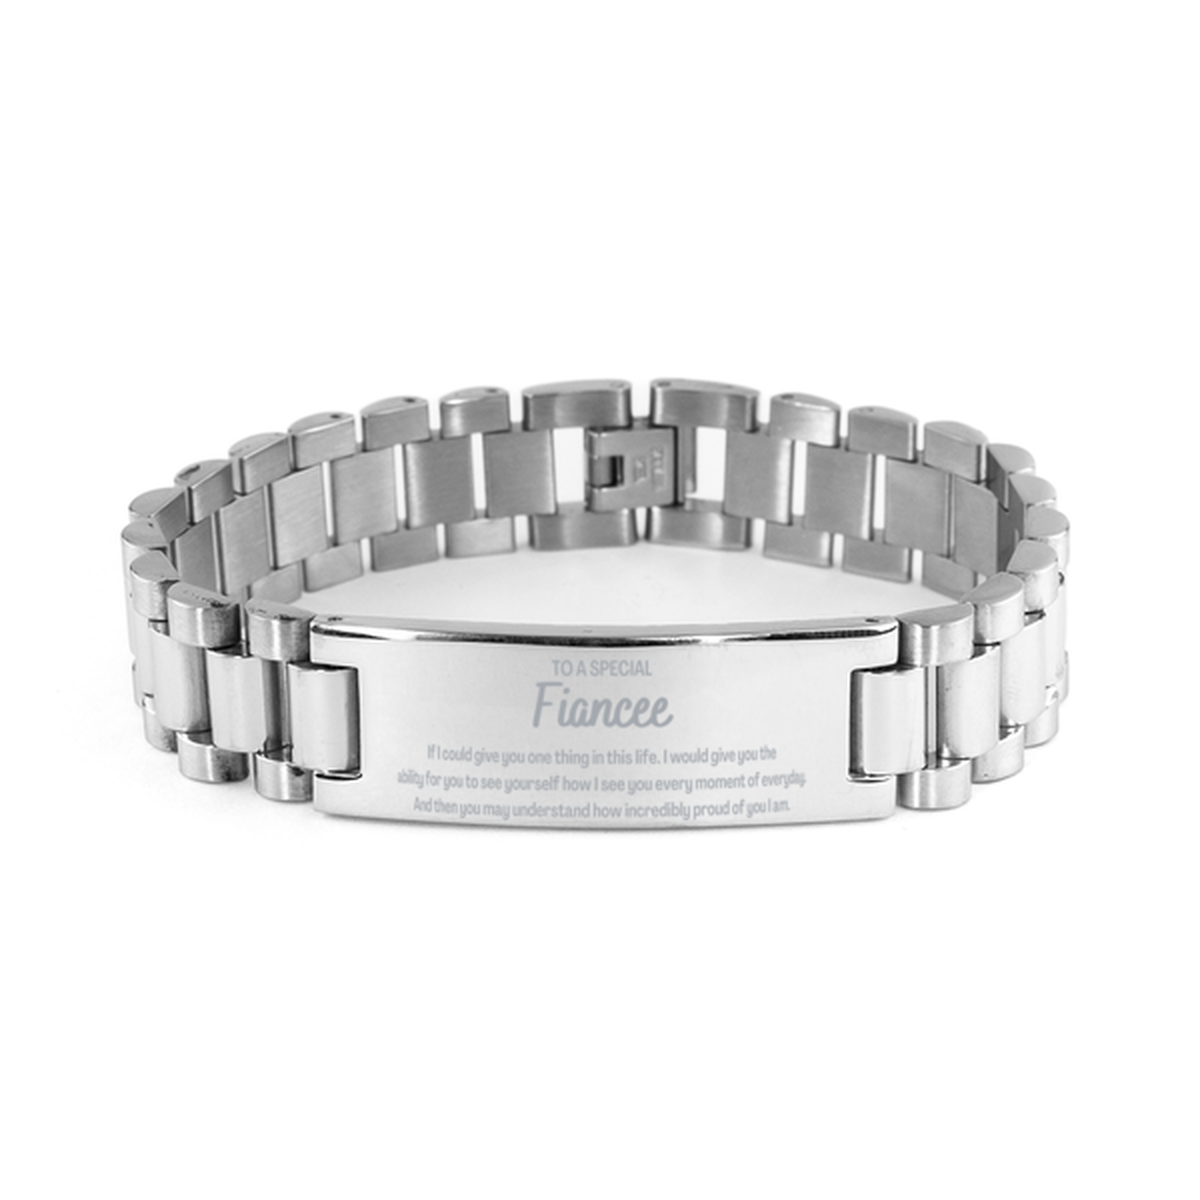 To My Fiancee Ladder Stainless Steel Bracelet, Gifts For Fiancee Engraved, Inspirational Gifts for Christmas Birthday, Epic Gifts for Fiancee To A Special Fiancee how incredibly proud of you I am